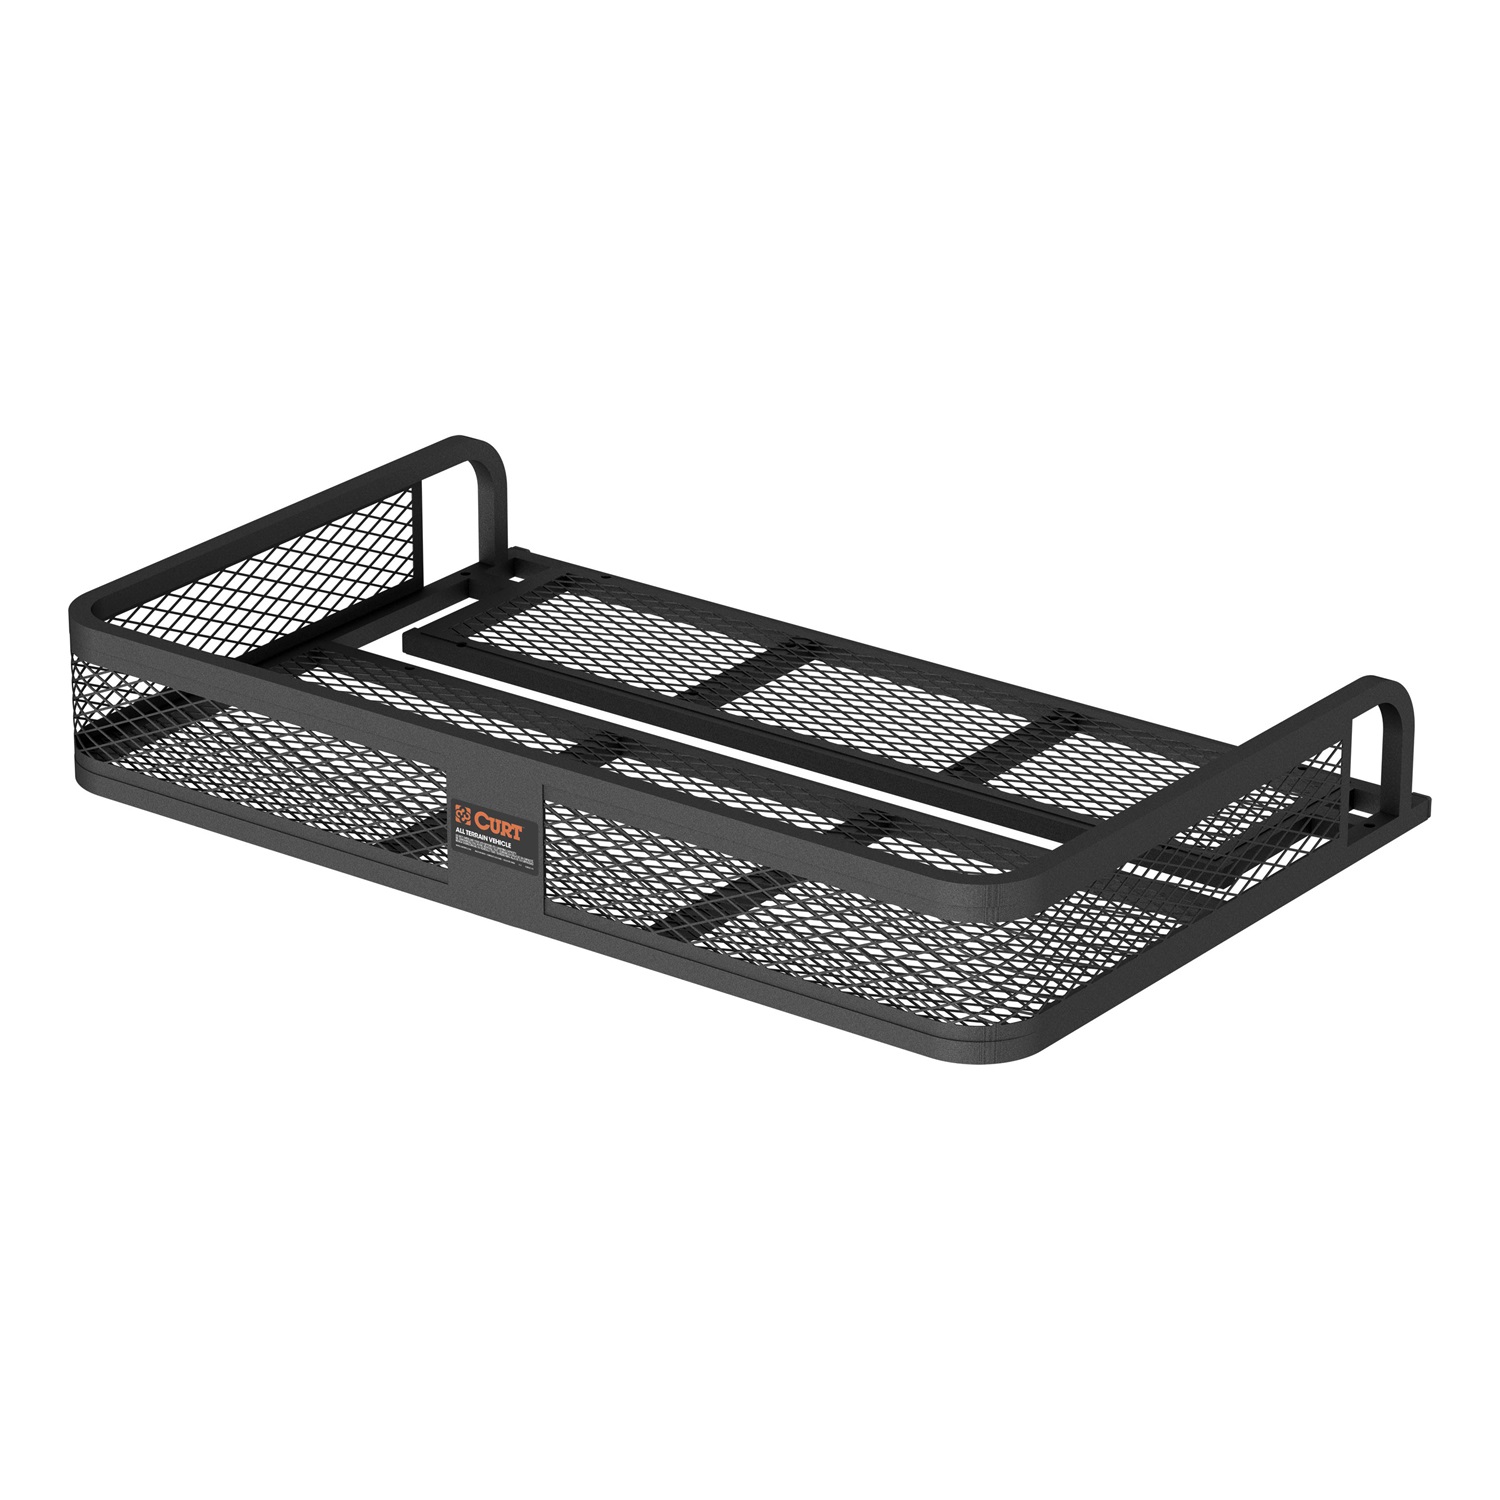 CURT Manufacturing CURT Manufacturing 18101 Basket Style Cargo Carrier  Fits